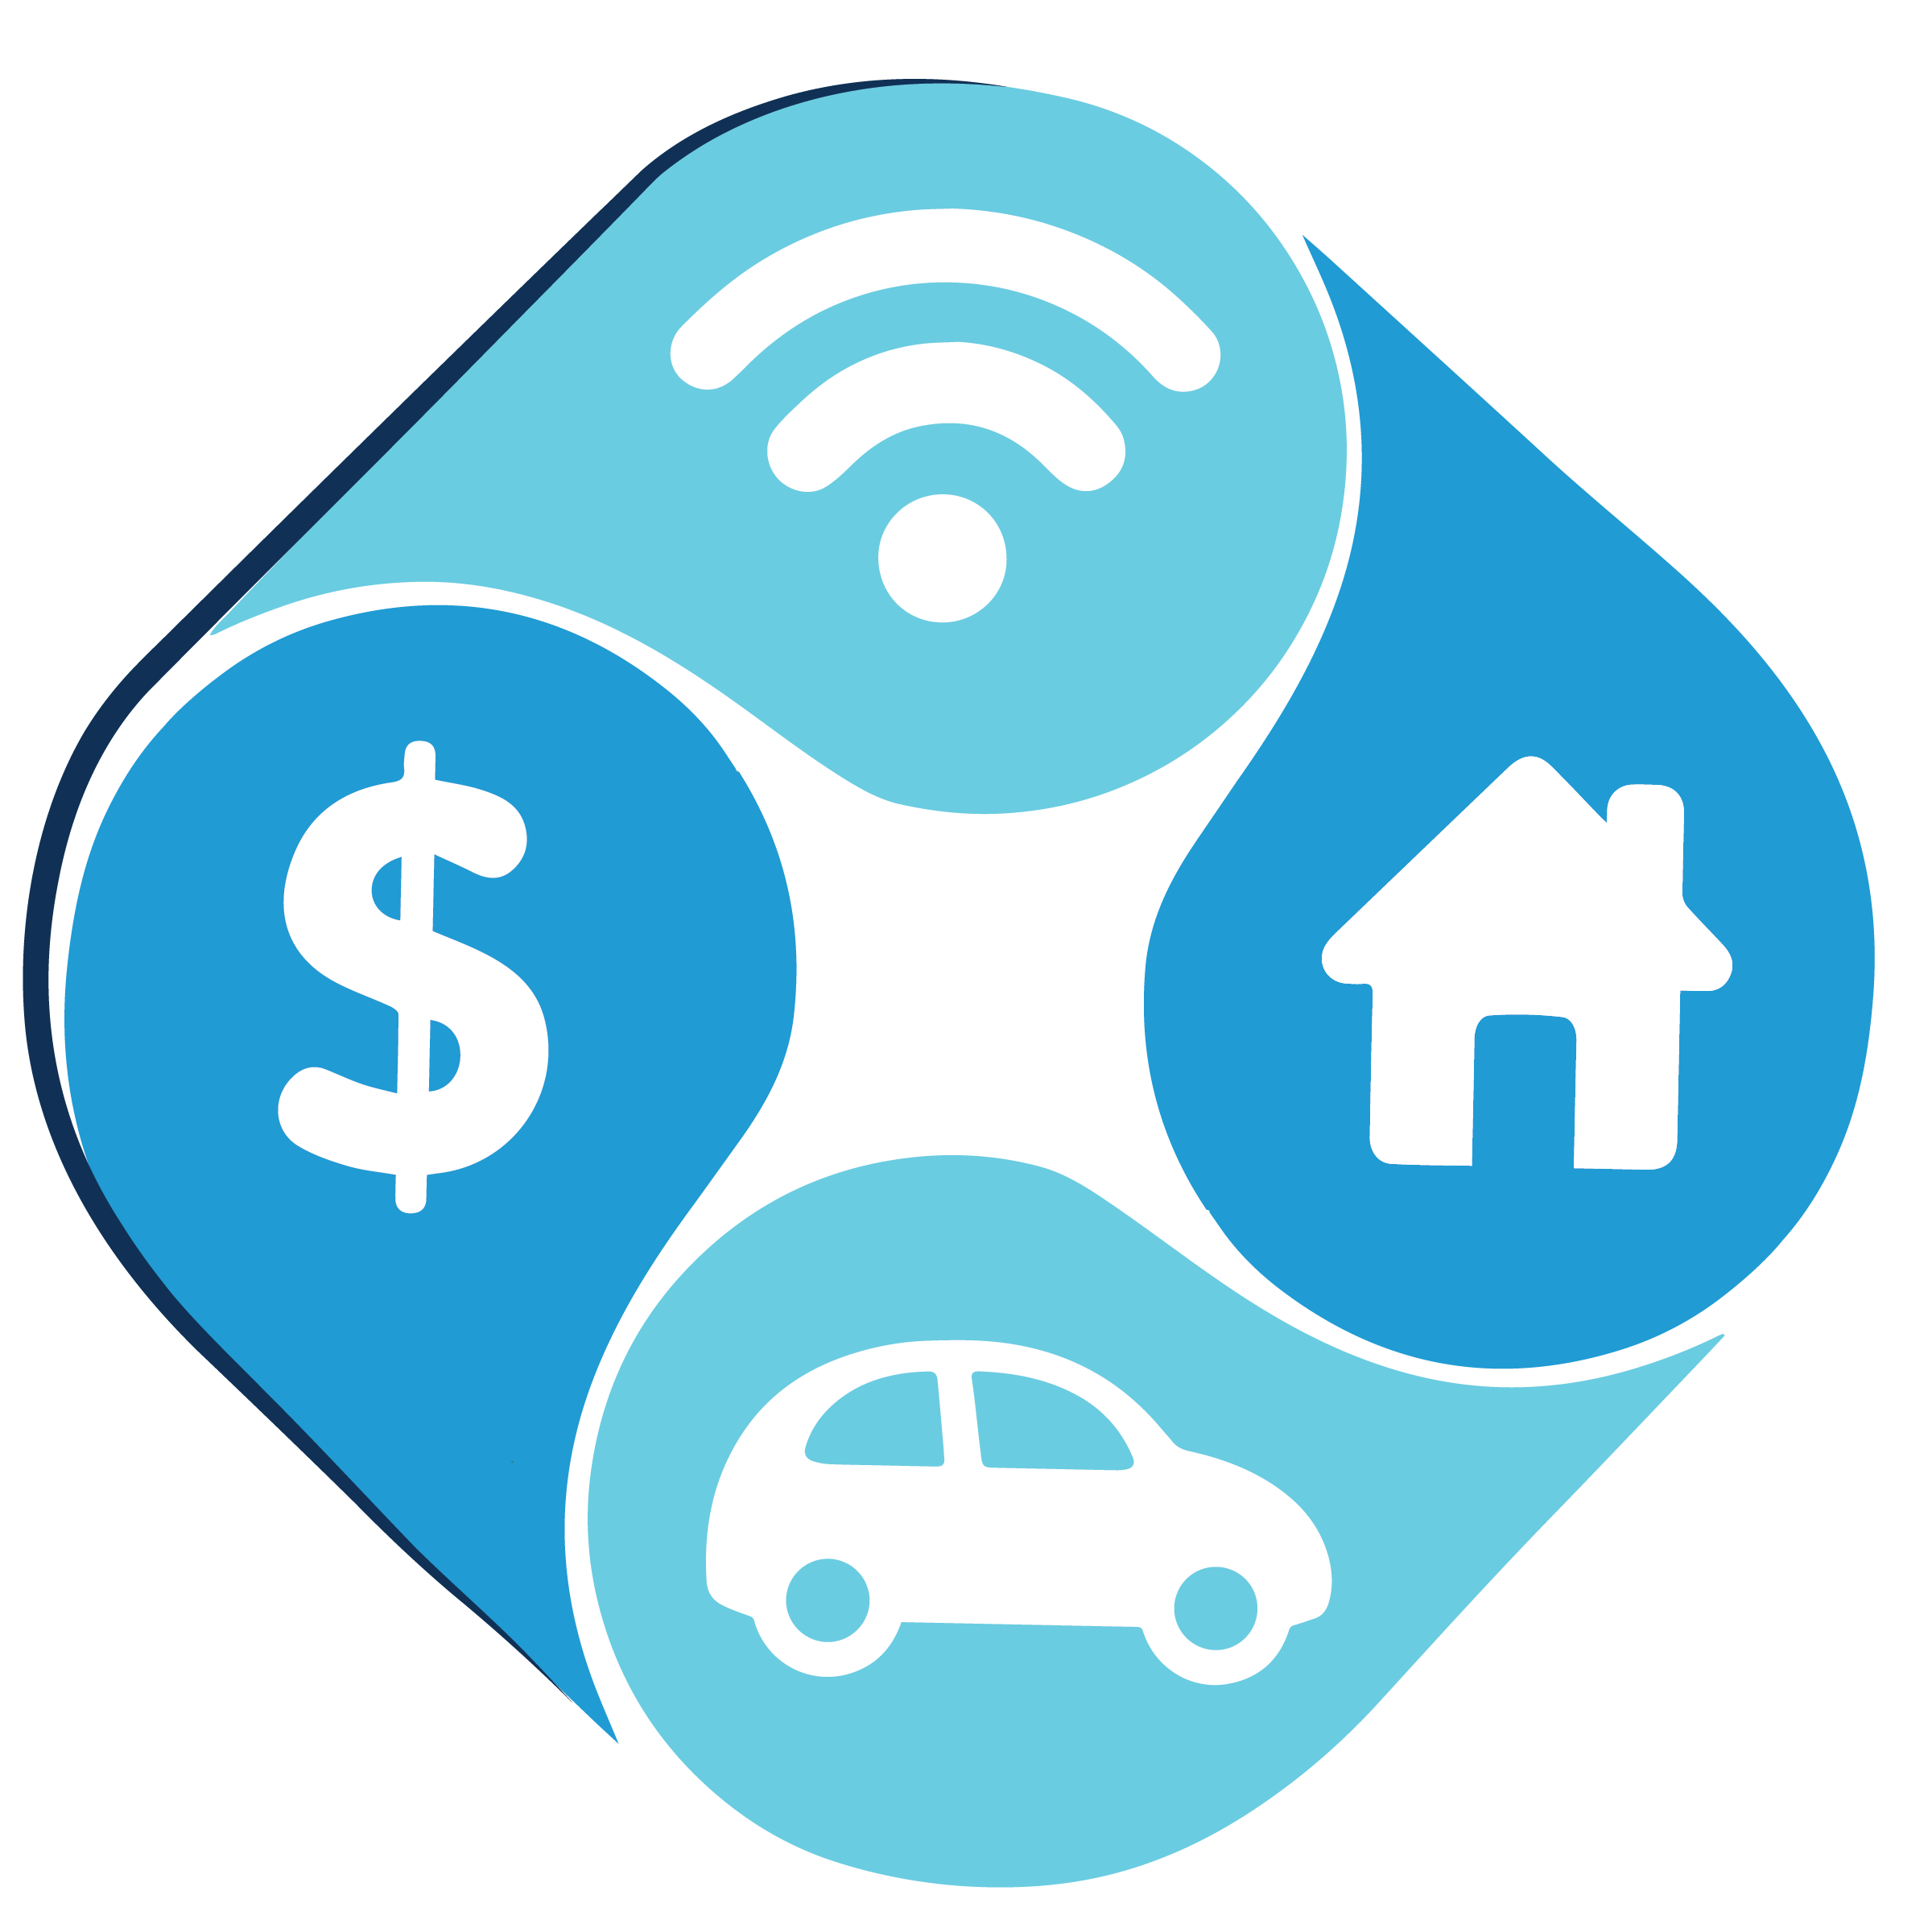 icon with wifi symbol, house, car, and american dollar sign